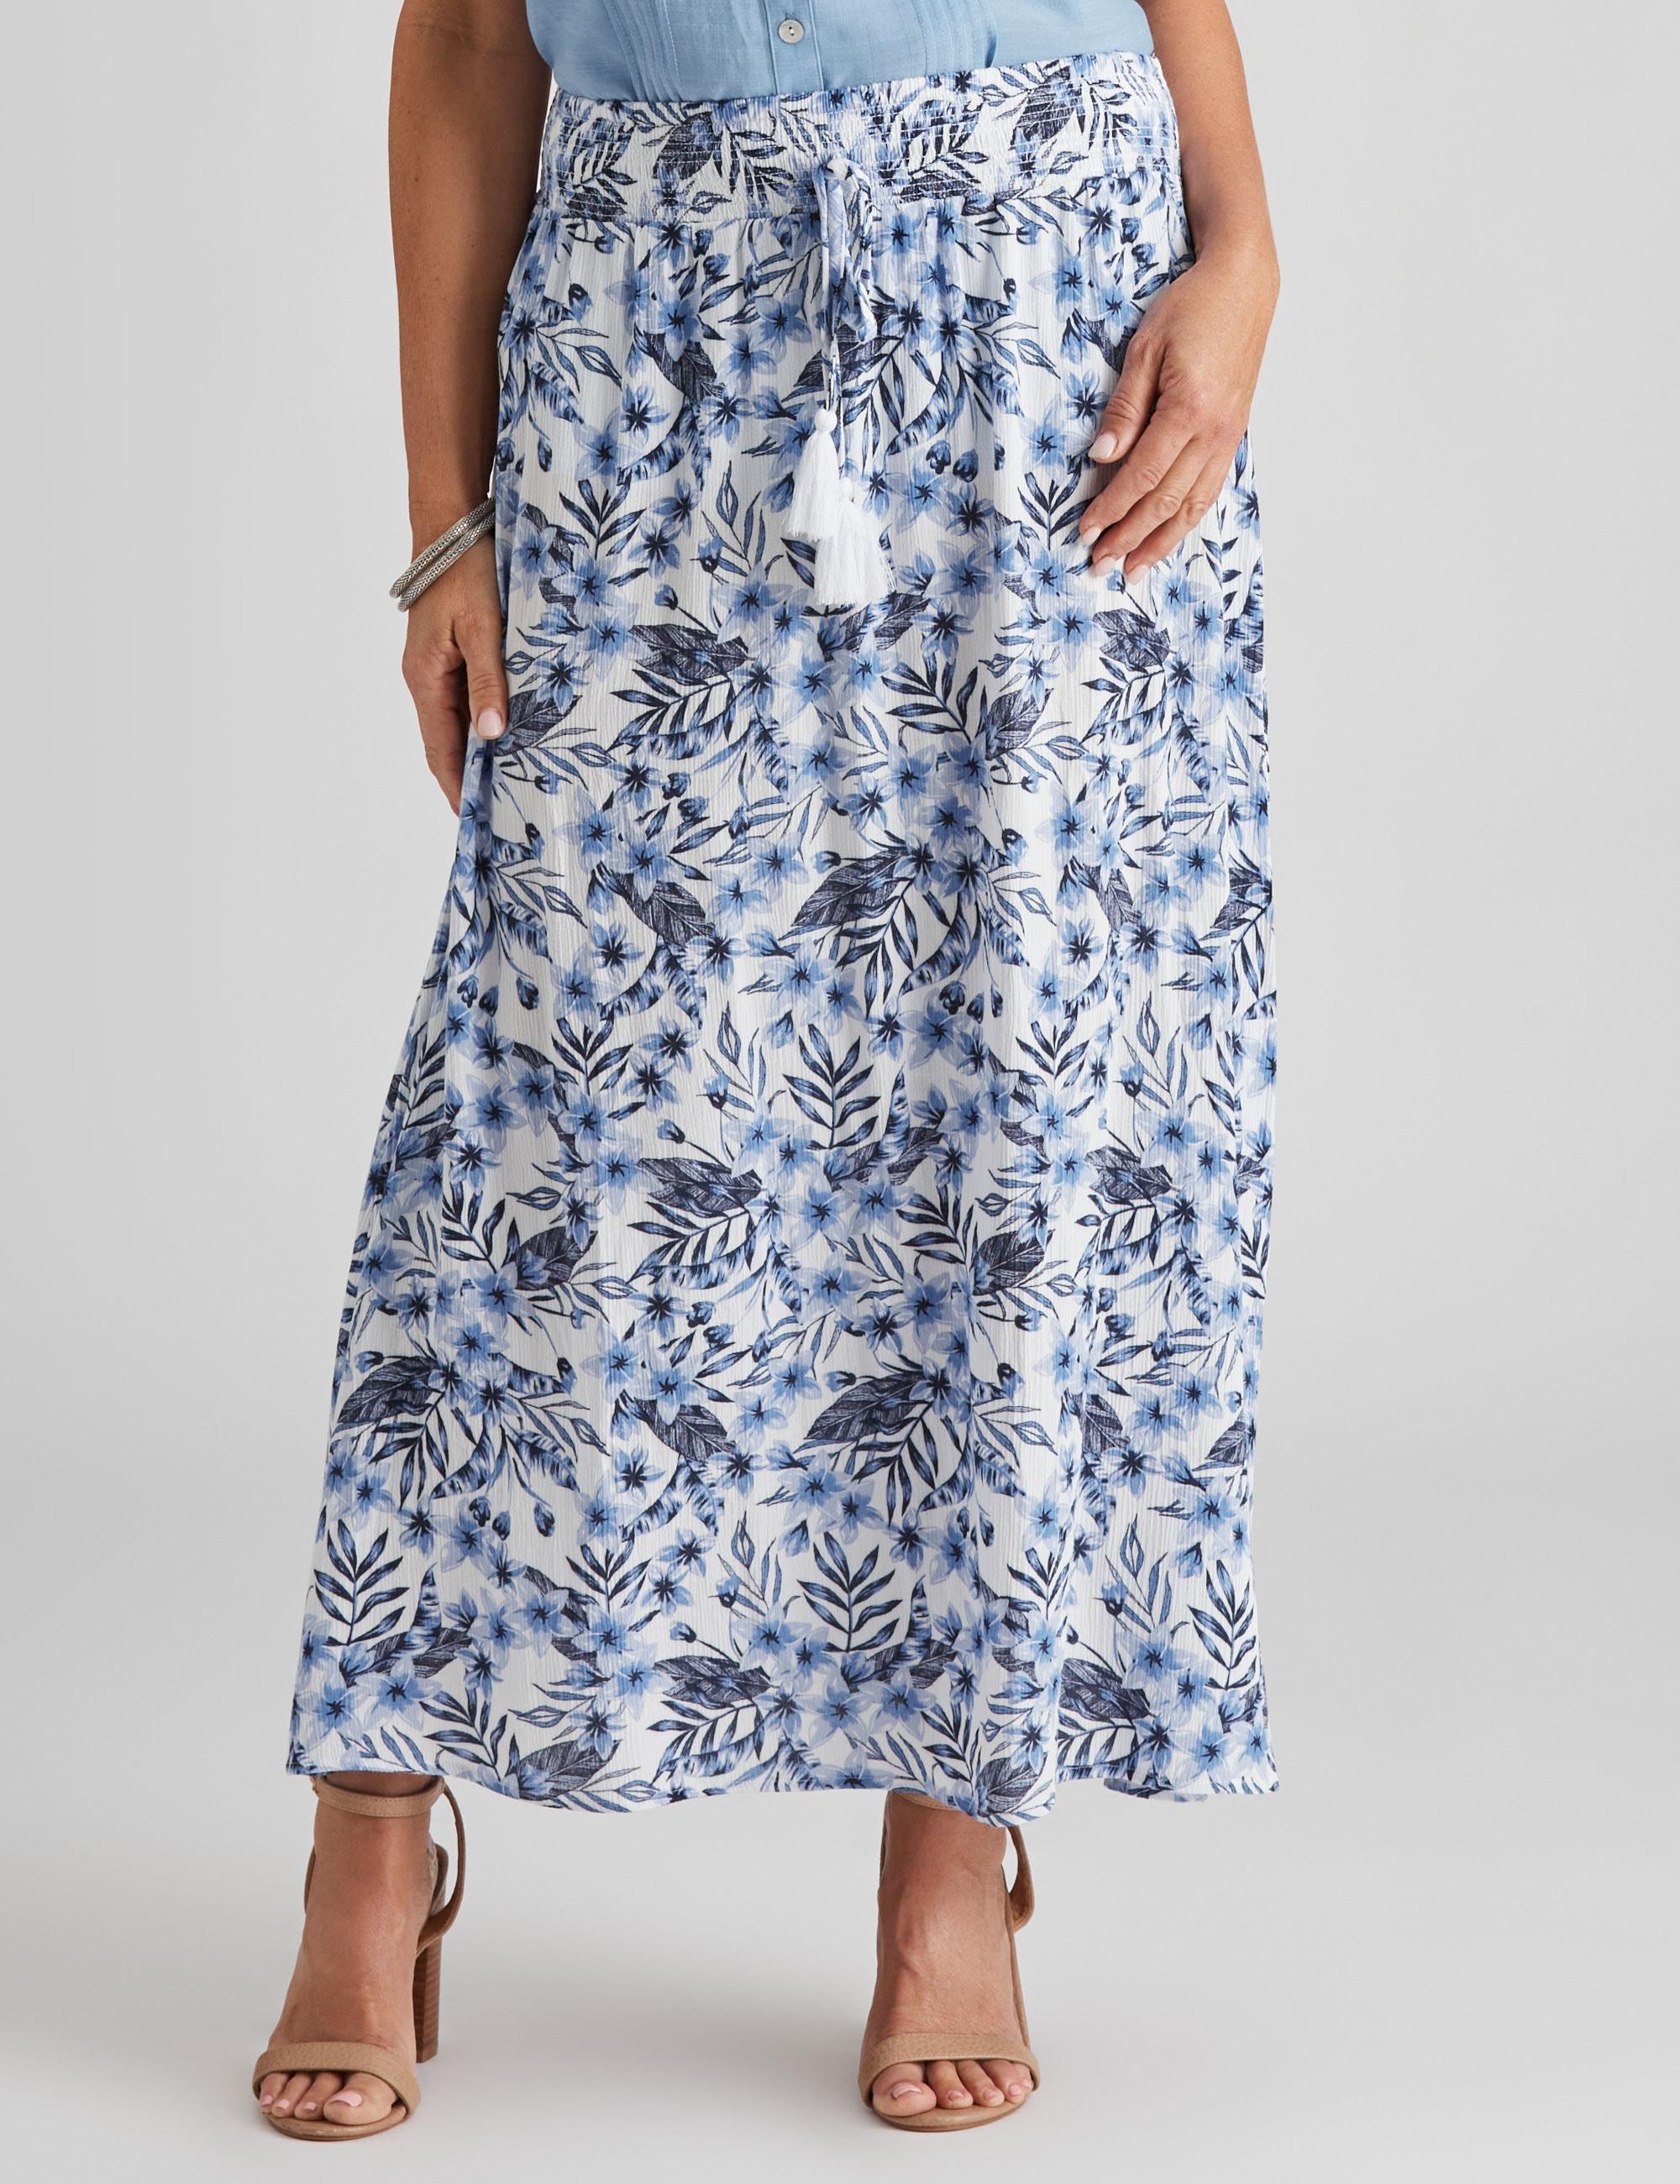 MILLERS - Womens Skirts - Maxi - Summer - Blue - Floral - A Line - Fashion - Oversized - Prined Crinkle - Long - Casual Work Clothes - Office Wear